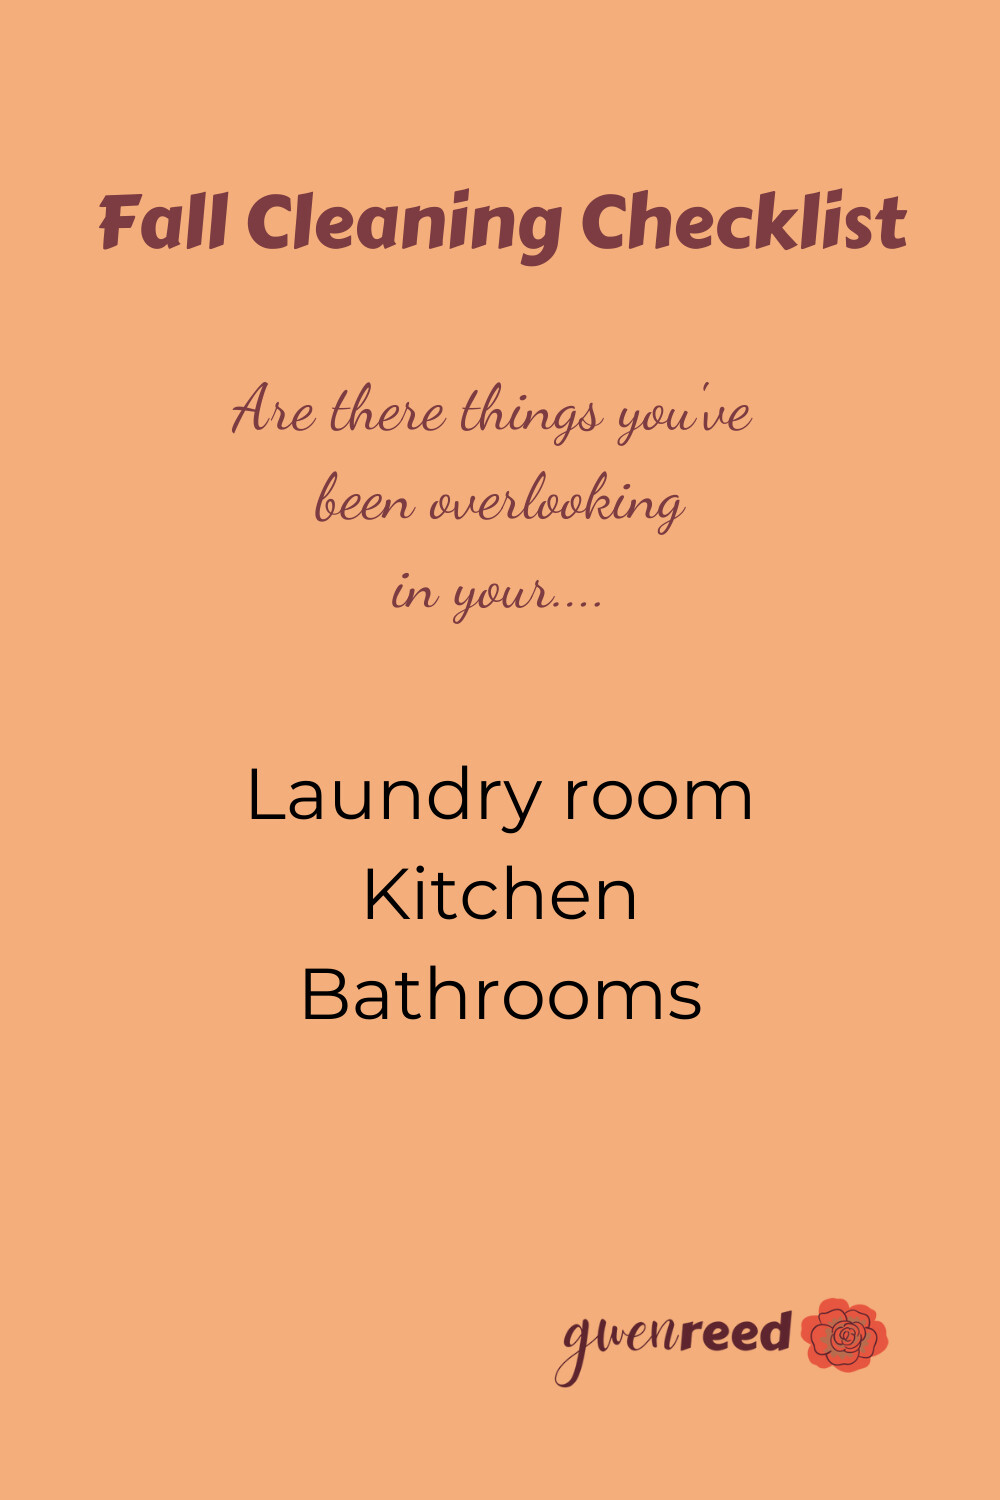 Fall Cleaning Checklist for your Kitchen, Bathrooms and Laundry Room